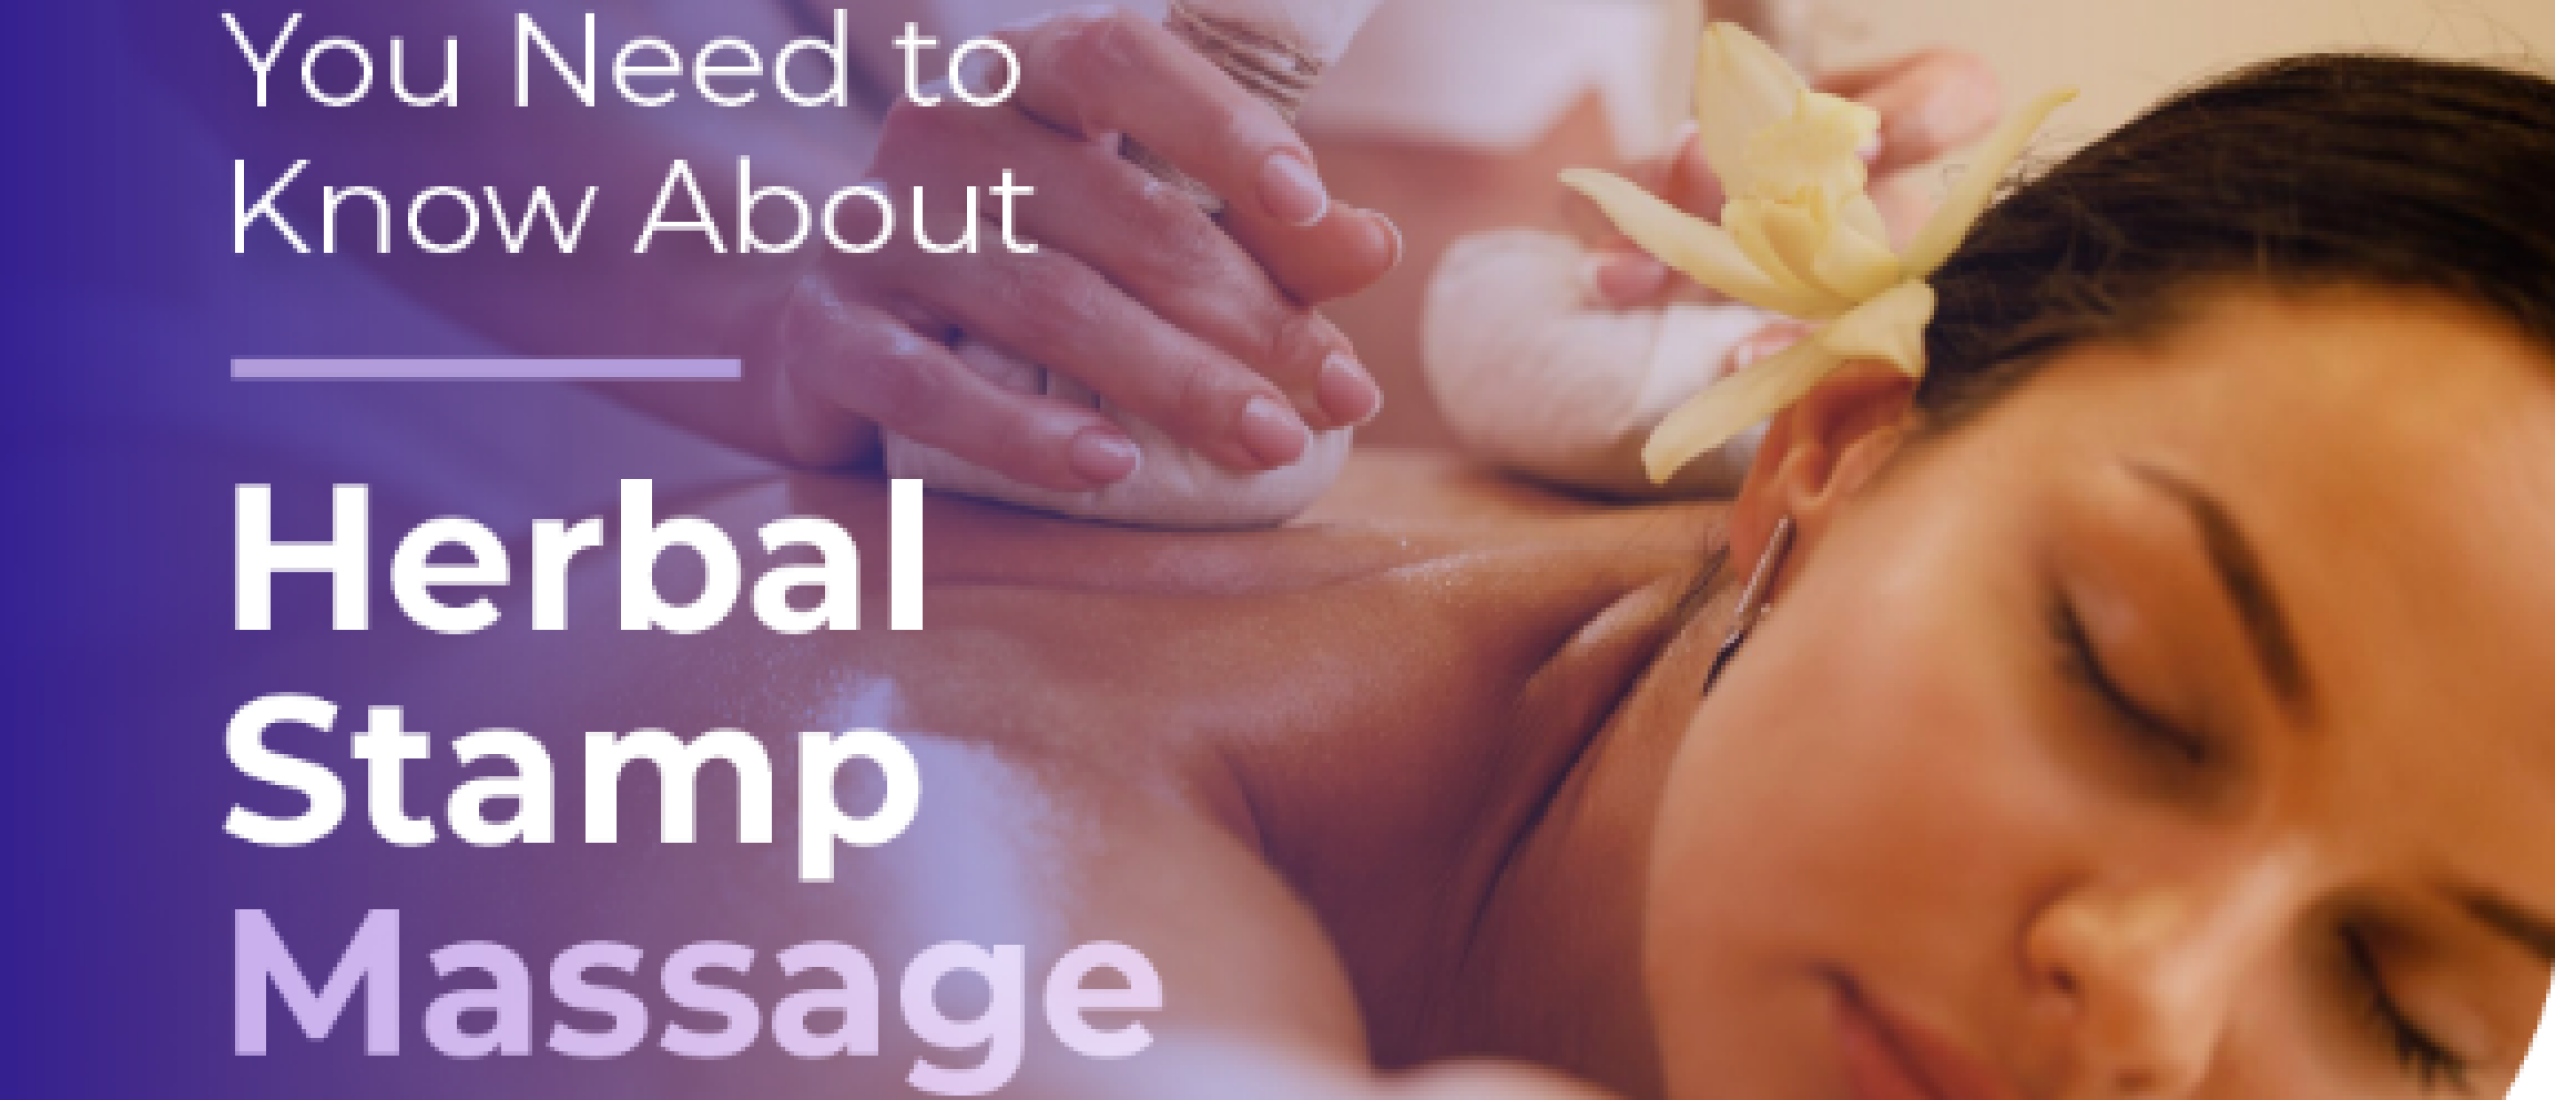 Things You Need to Know About Herbal Stamp Massage